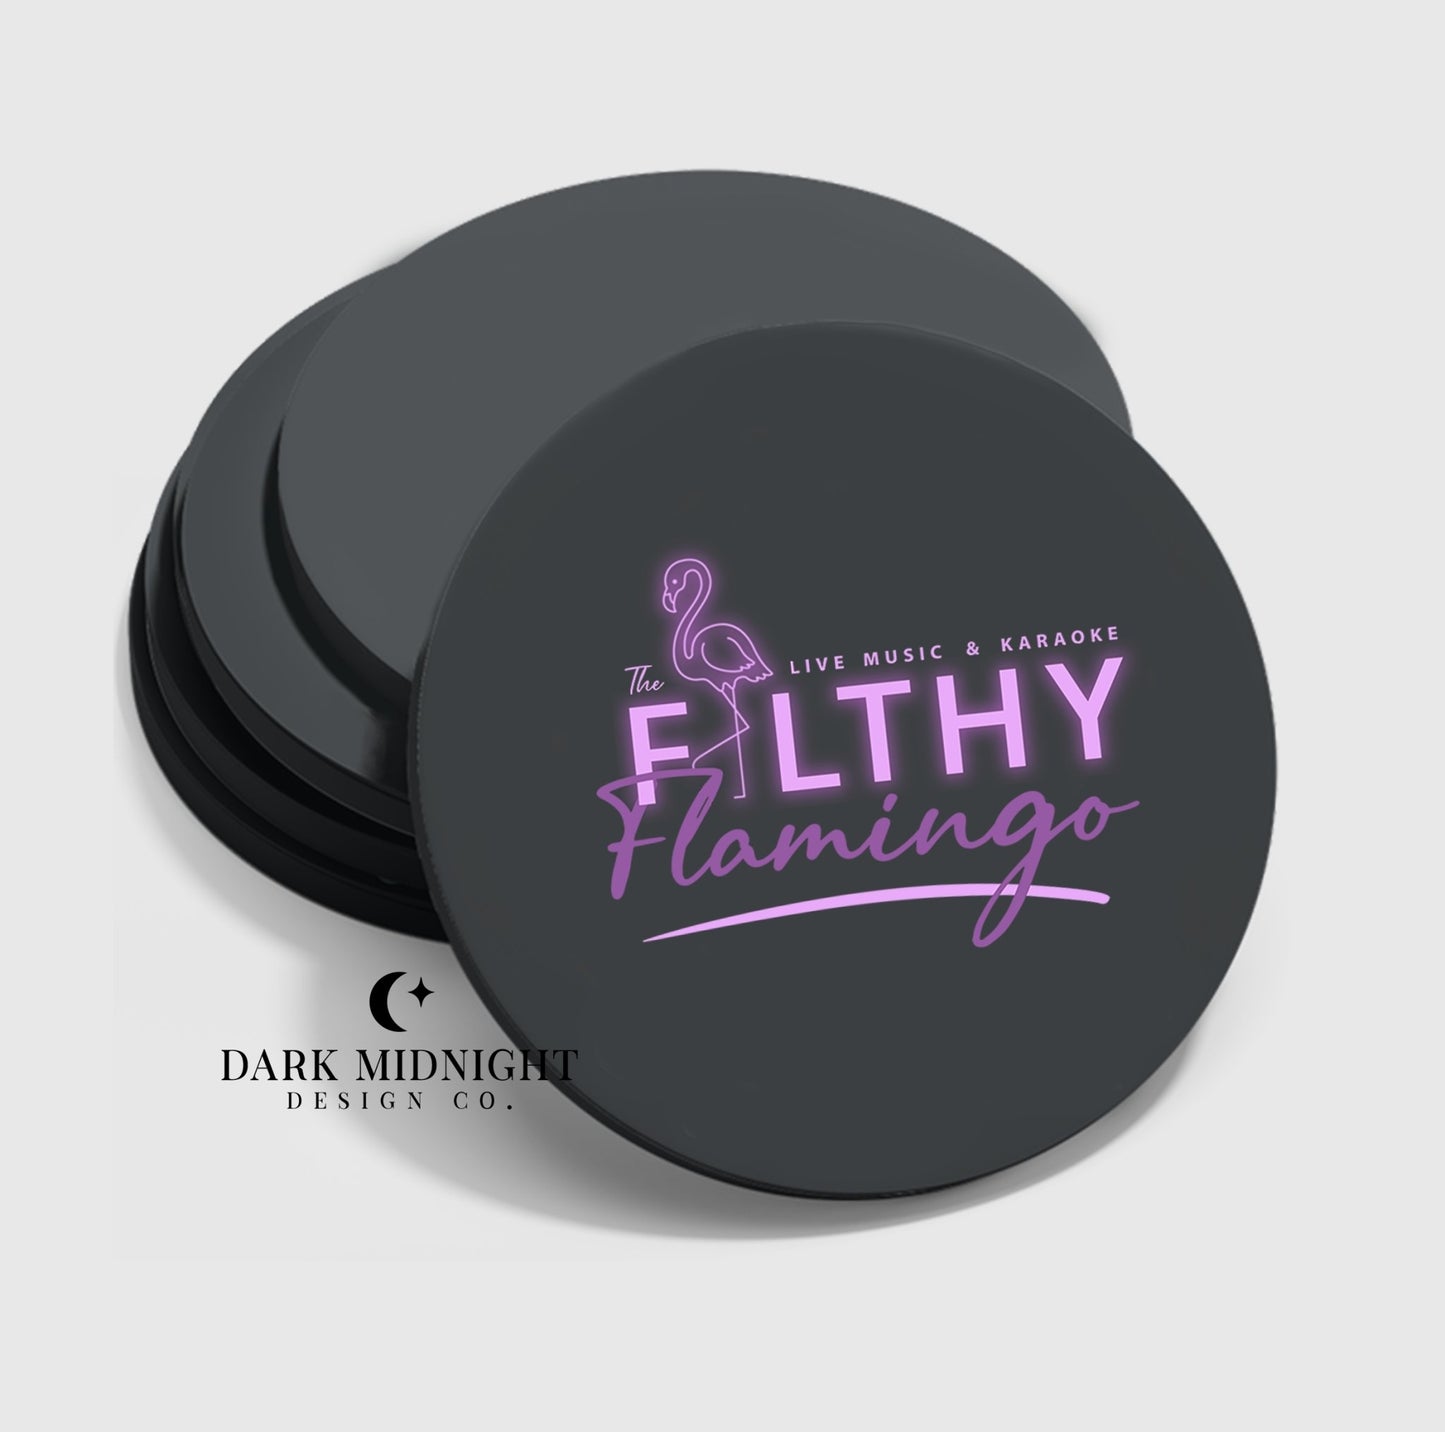 Pre-Order: Filthy Flamingo Logo Coasters - Set of 4 - Officially Licensed Vancouver Storm Series - Dark Midnight Design Co